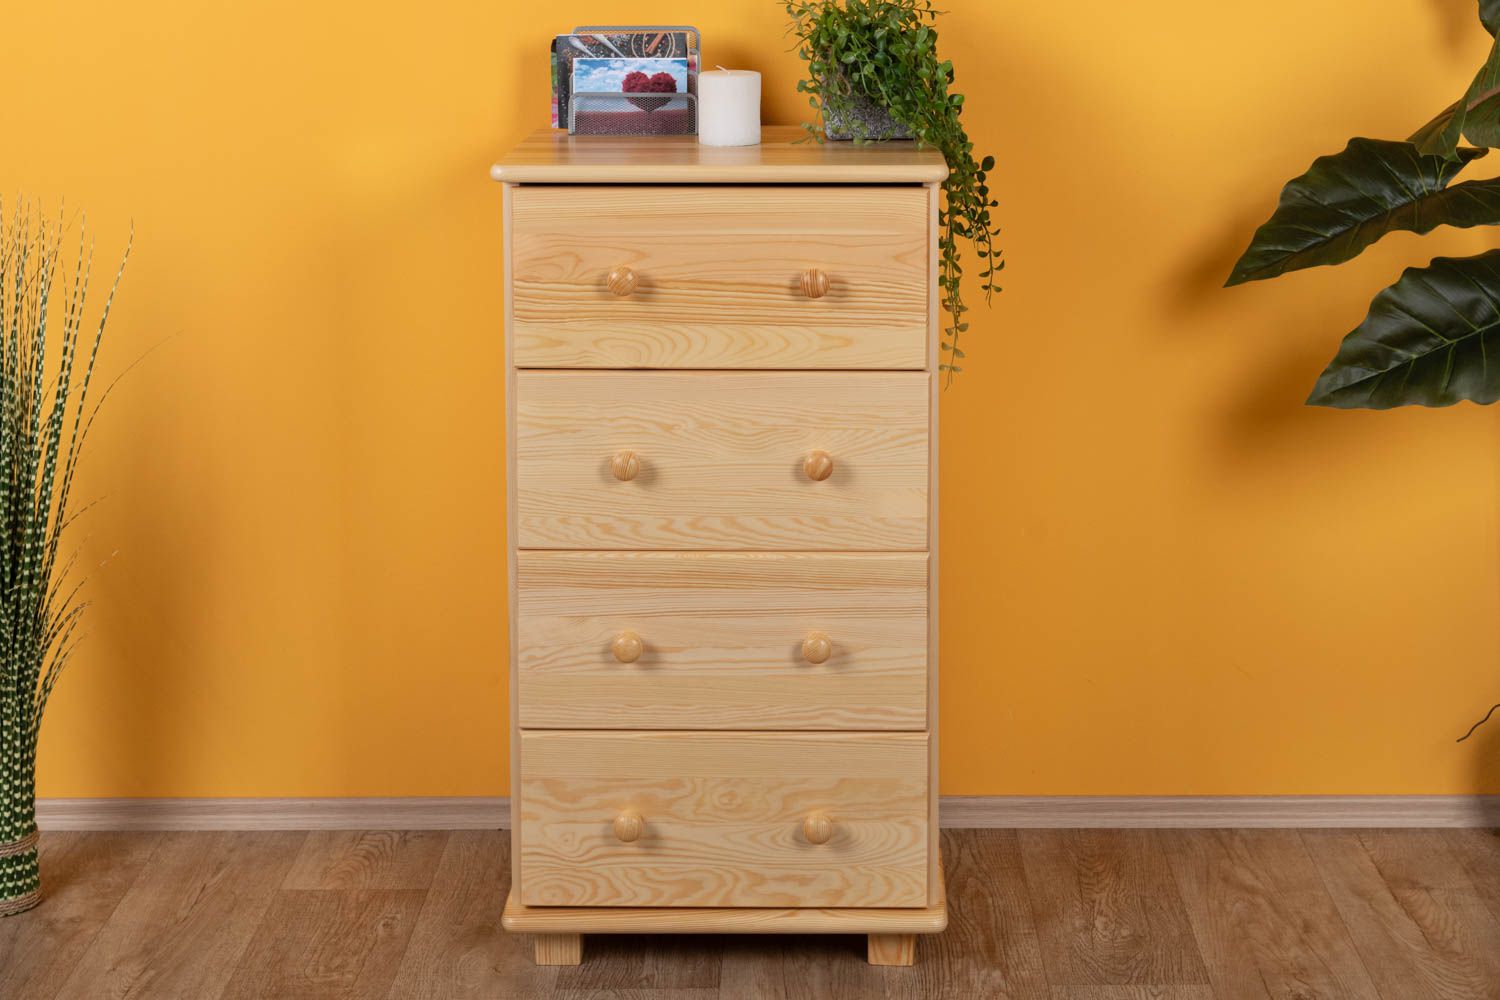 Chest of drawers solid pine solid wood natural 034 - Dimensions 100 x 55 x 47 cm (H x W x D)